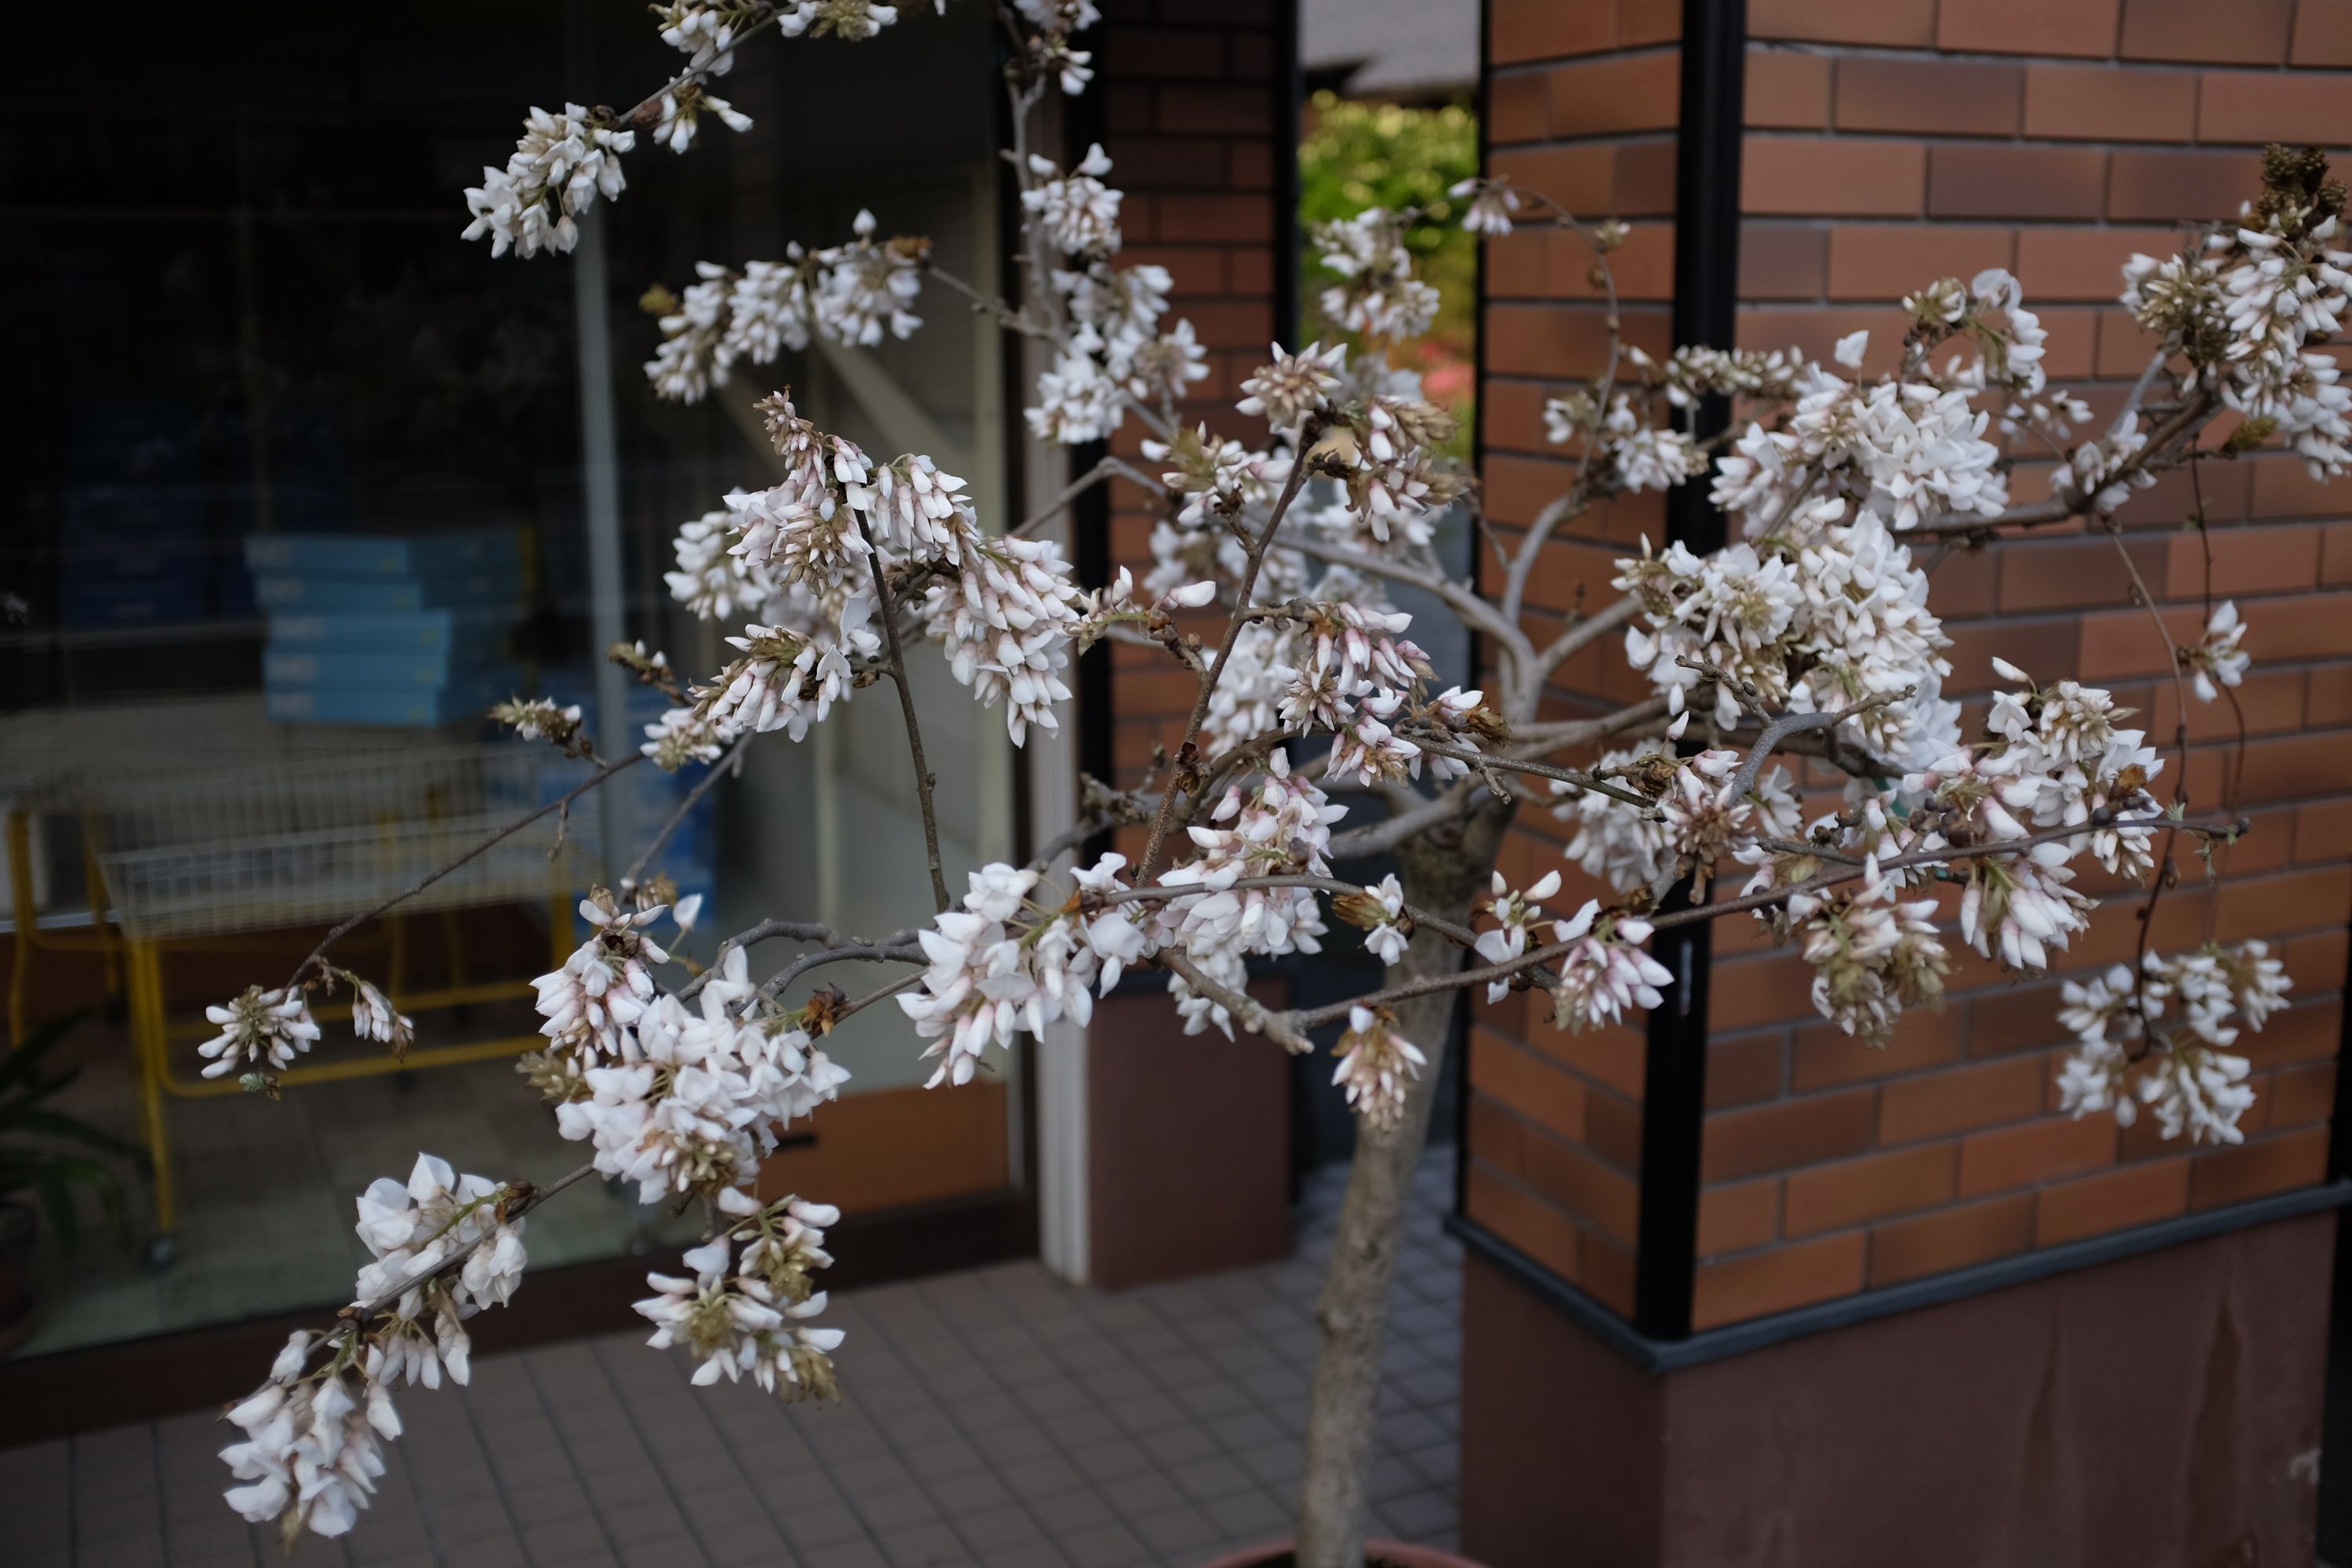 A small tree in white bloom at the entrance of a house.